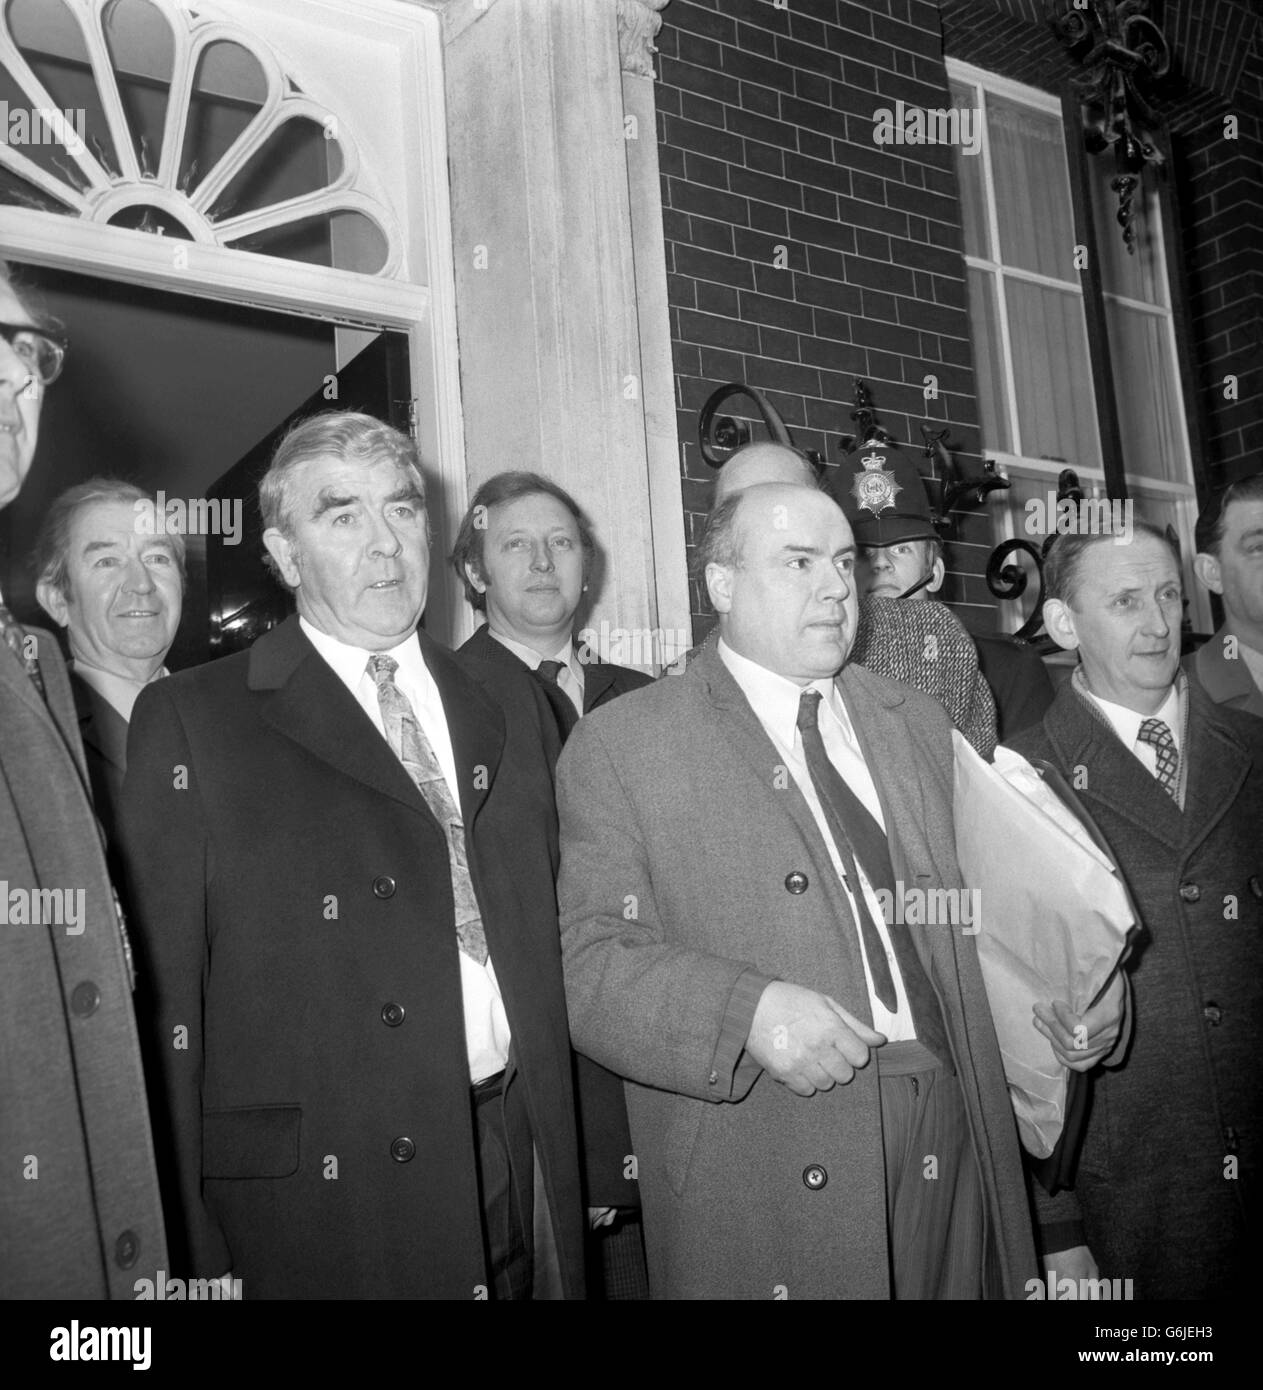 Mr Joe Gormley (left), president, and Mr Lawrence Daly, general secretary, of the National Union of Mineworkers arriving at No.10 Downing Street today for the miners' leader' talks with Prime Minister Mr. Edward Heath. Stock Photo